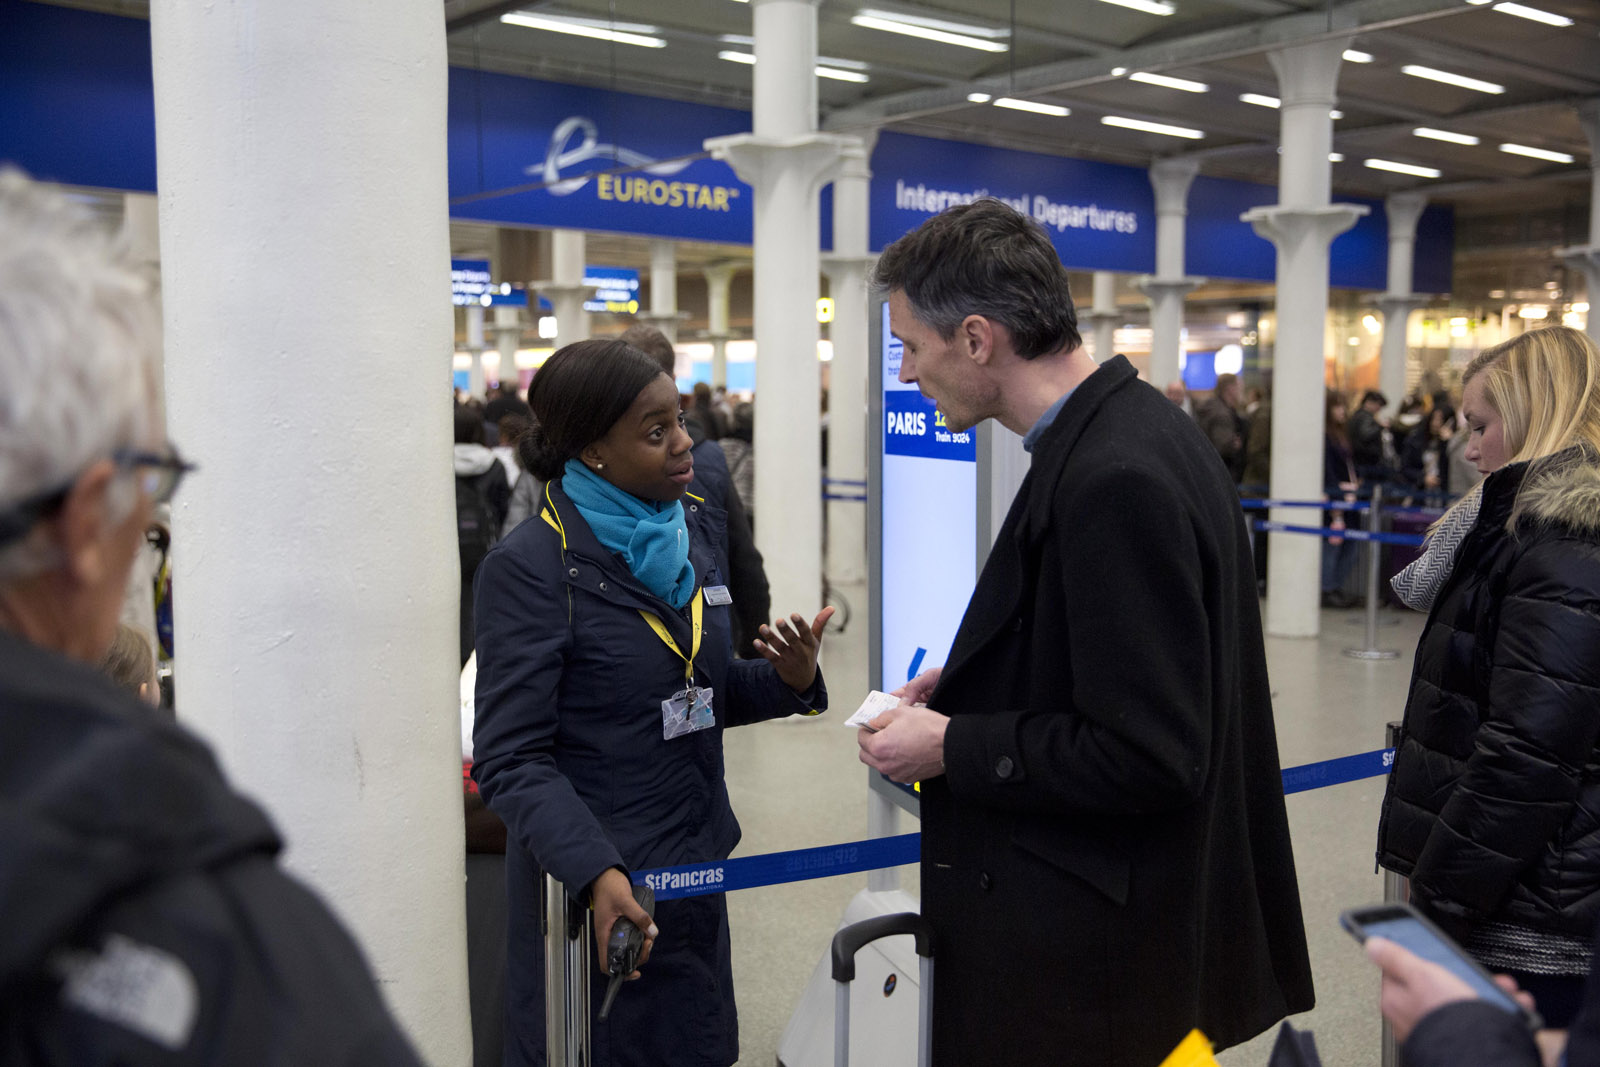 A Eurostar representative gives advice to a traveler after services were suspended on the Brussels Eurostar train route because of the attacks in Belgium, at St Pancras international railway station in London, Tuesday, March 22, 2016. Explosions, at least one likely caused by a suicide bomber, rocked the Brussels airport and subway system Tuesday, prompting a lockdown of the Belgian capital and heightened security across Europe. (AP Photo/Matt Dunham)